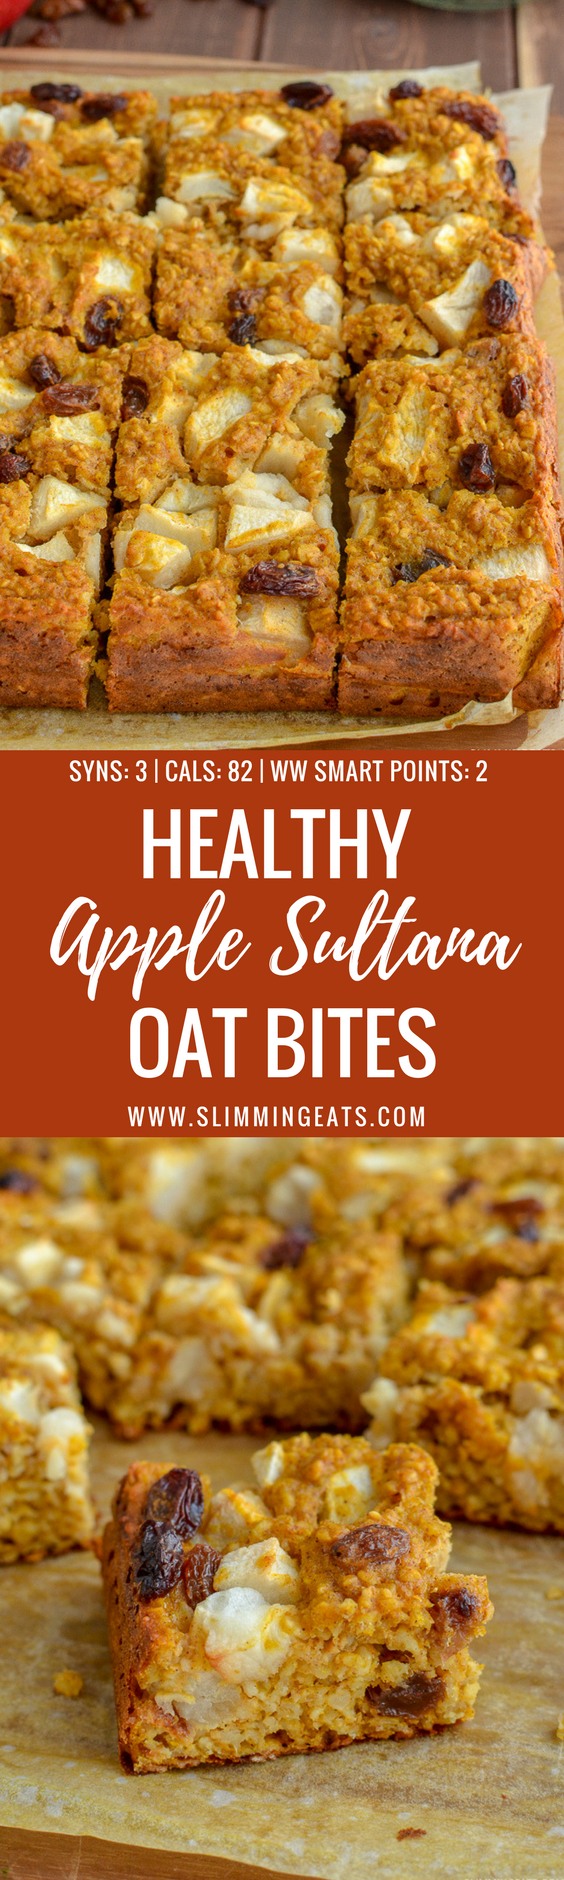 Healthy Apple Sultana Oat Bites which are super easy to make and perfect for the whole family to enjoy. They contain no artificial sweeteners and are a perfect breakfast, dessert or snack. Just 3 syns on Slimming World or 2 WW Smart Points per bite | www.slimmingeats.com